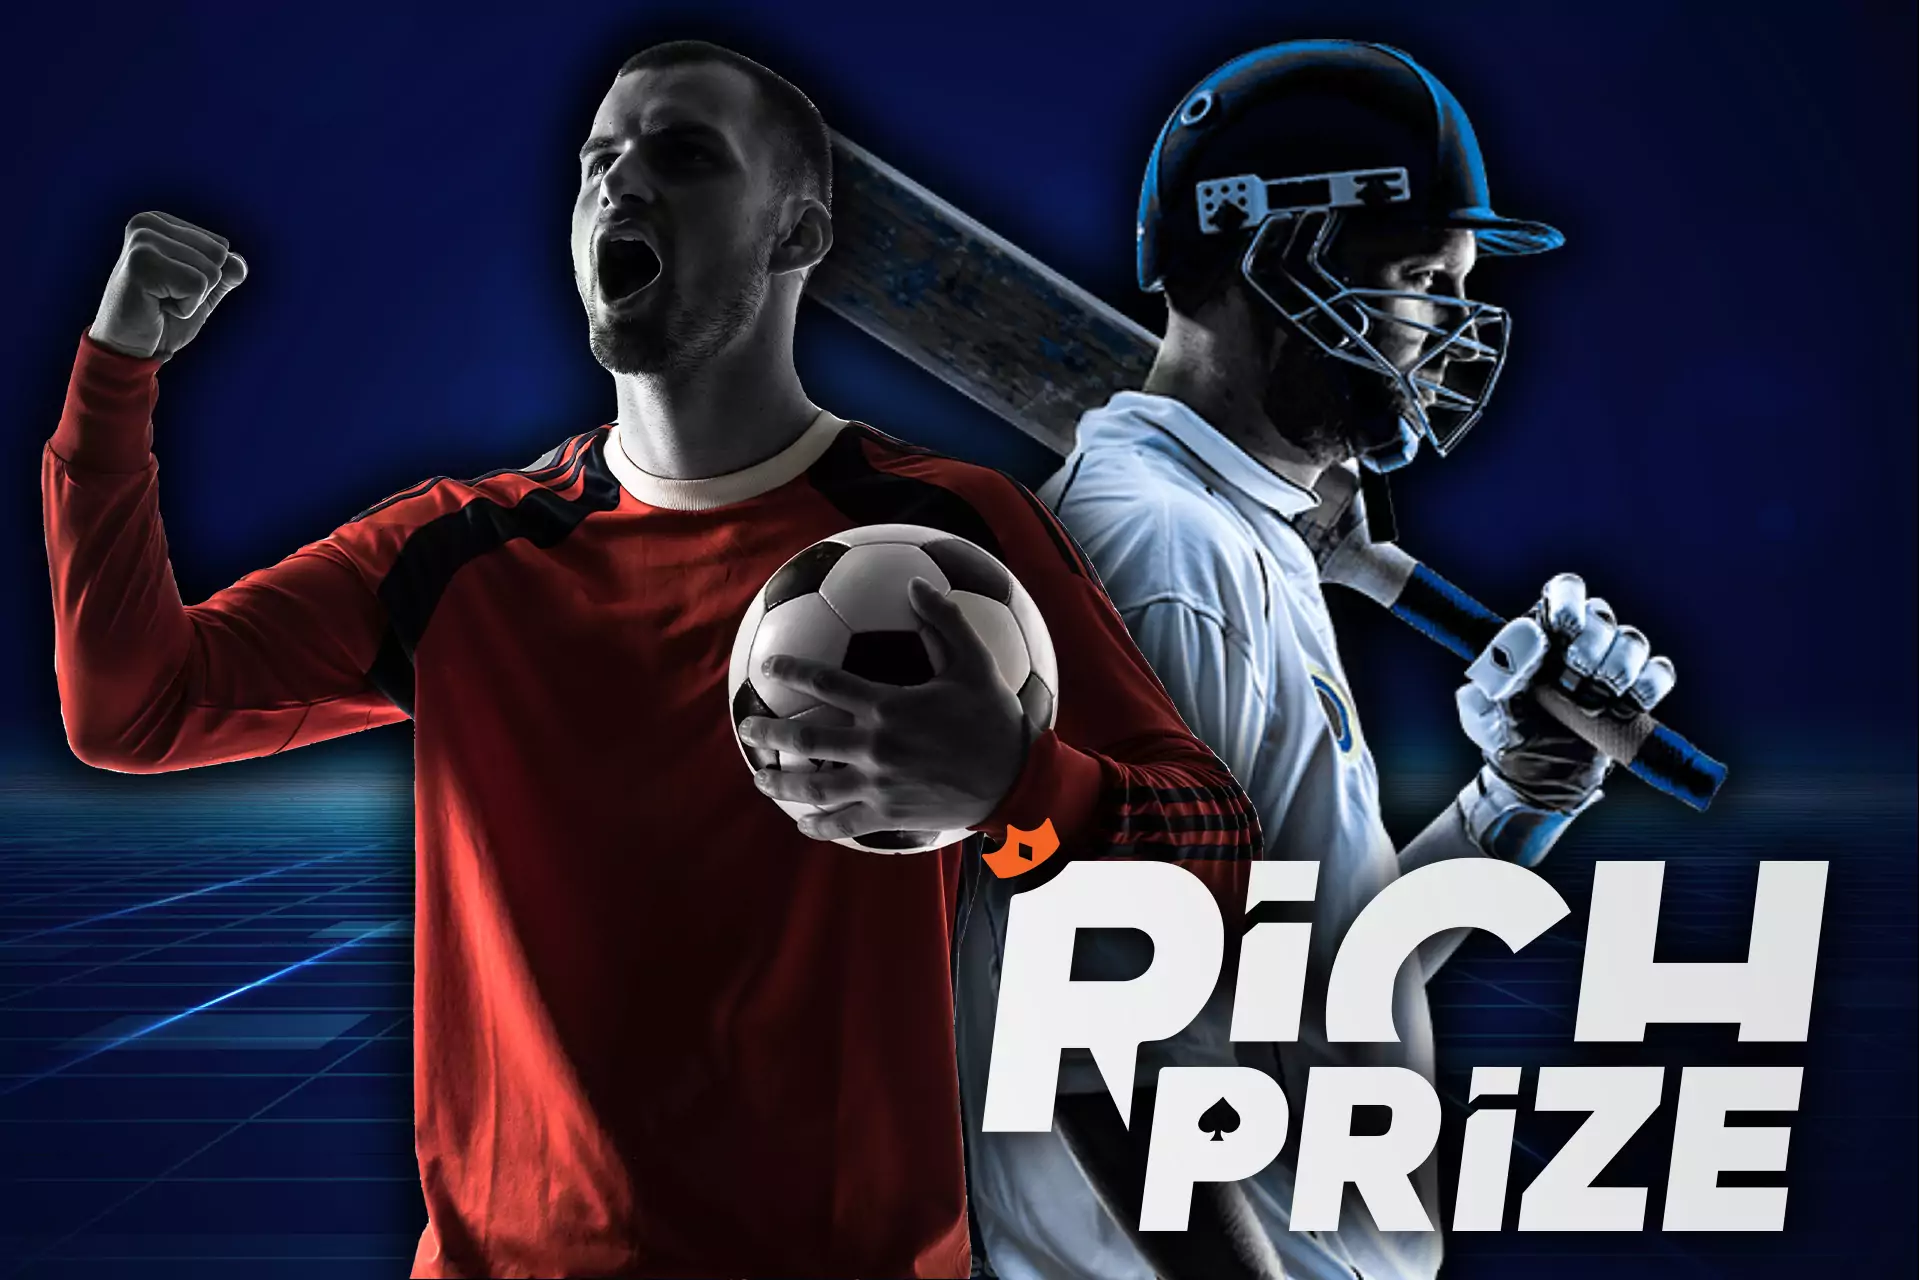 At RichPrize, you find all the most popular sports tournaments.